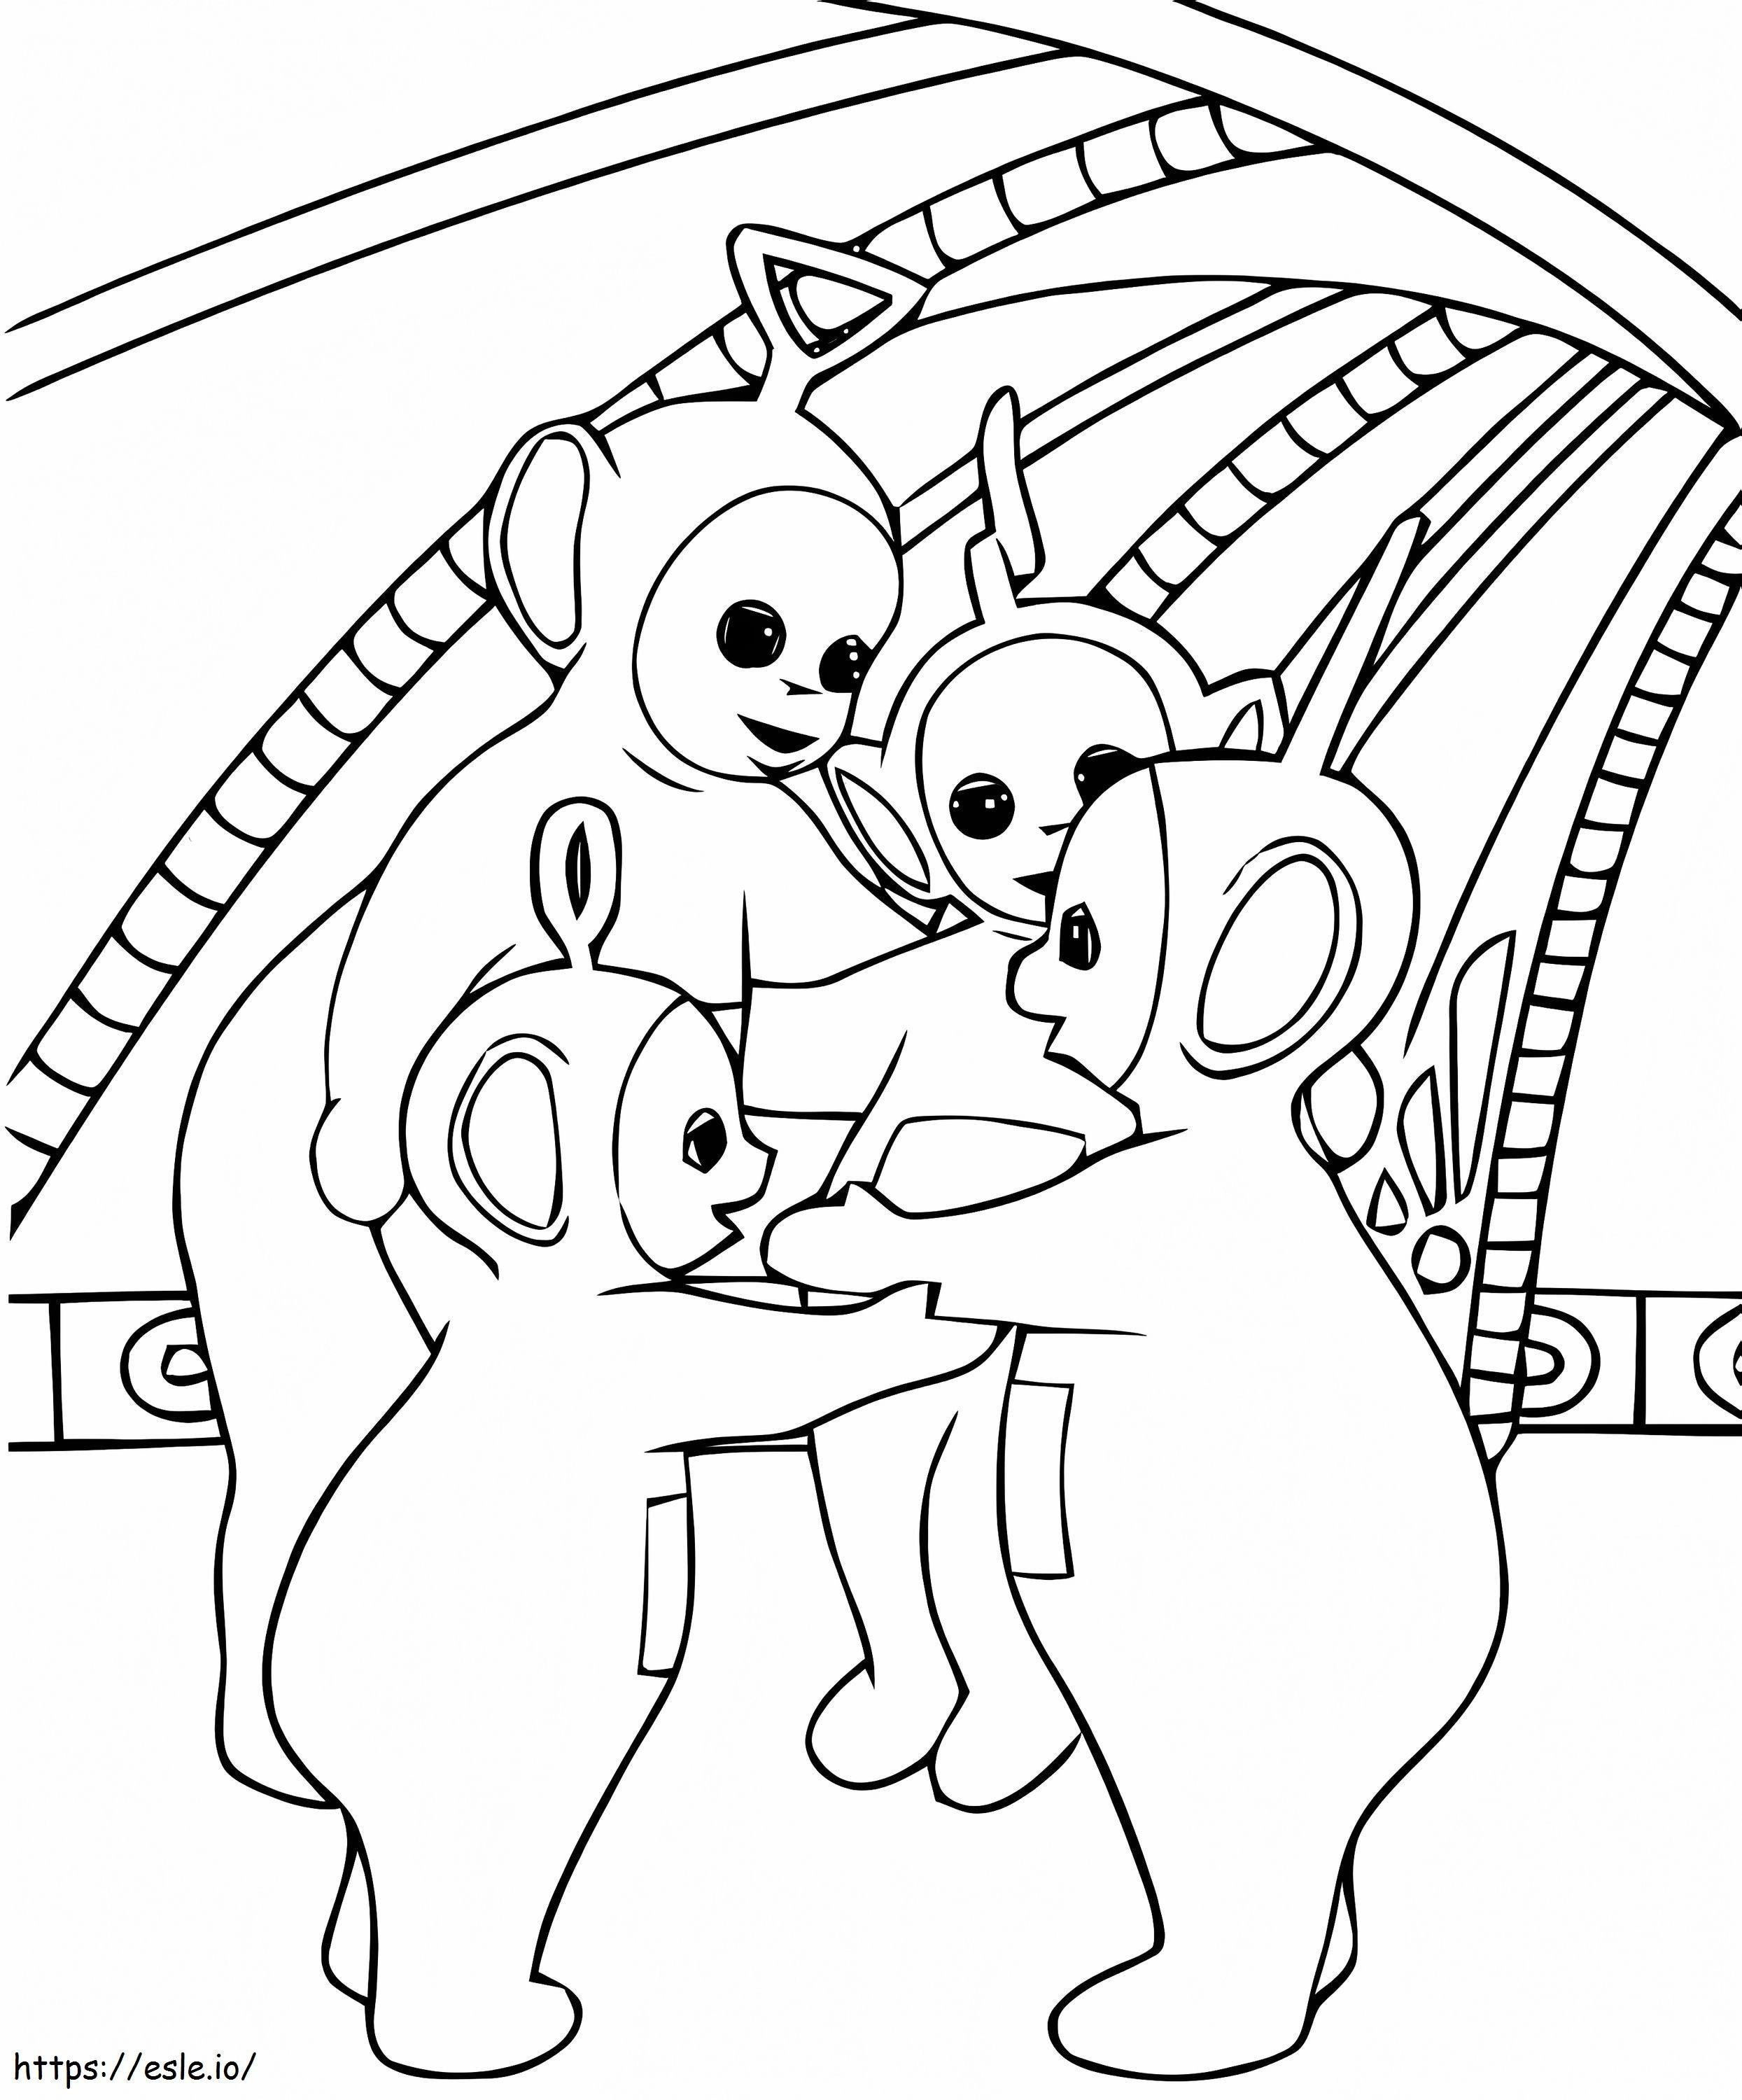 Teletubbies Coloring Page 7 coloring page